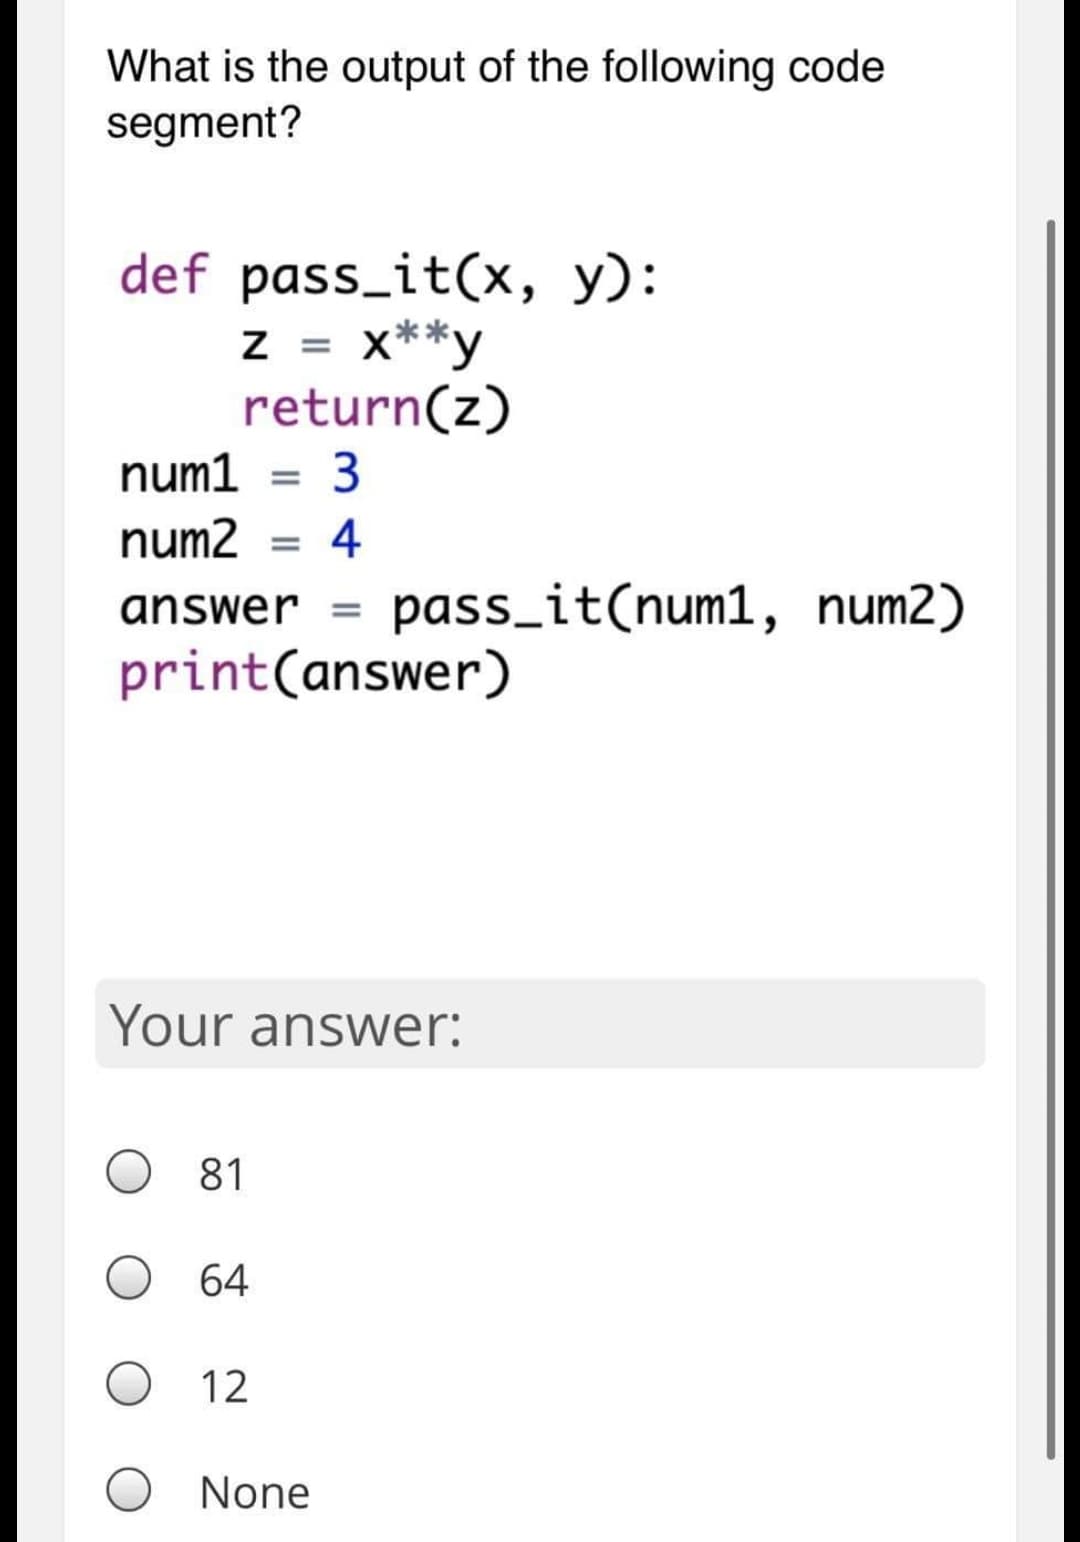 What is the output of the following code
segment?
def pass_it(x, y):
x**y
return(z)
3
num1
num2 = 4
answer
pass_it(num1, num2)
print(answer)
Your answer:
81
O 64
12
O None
